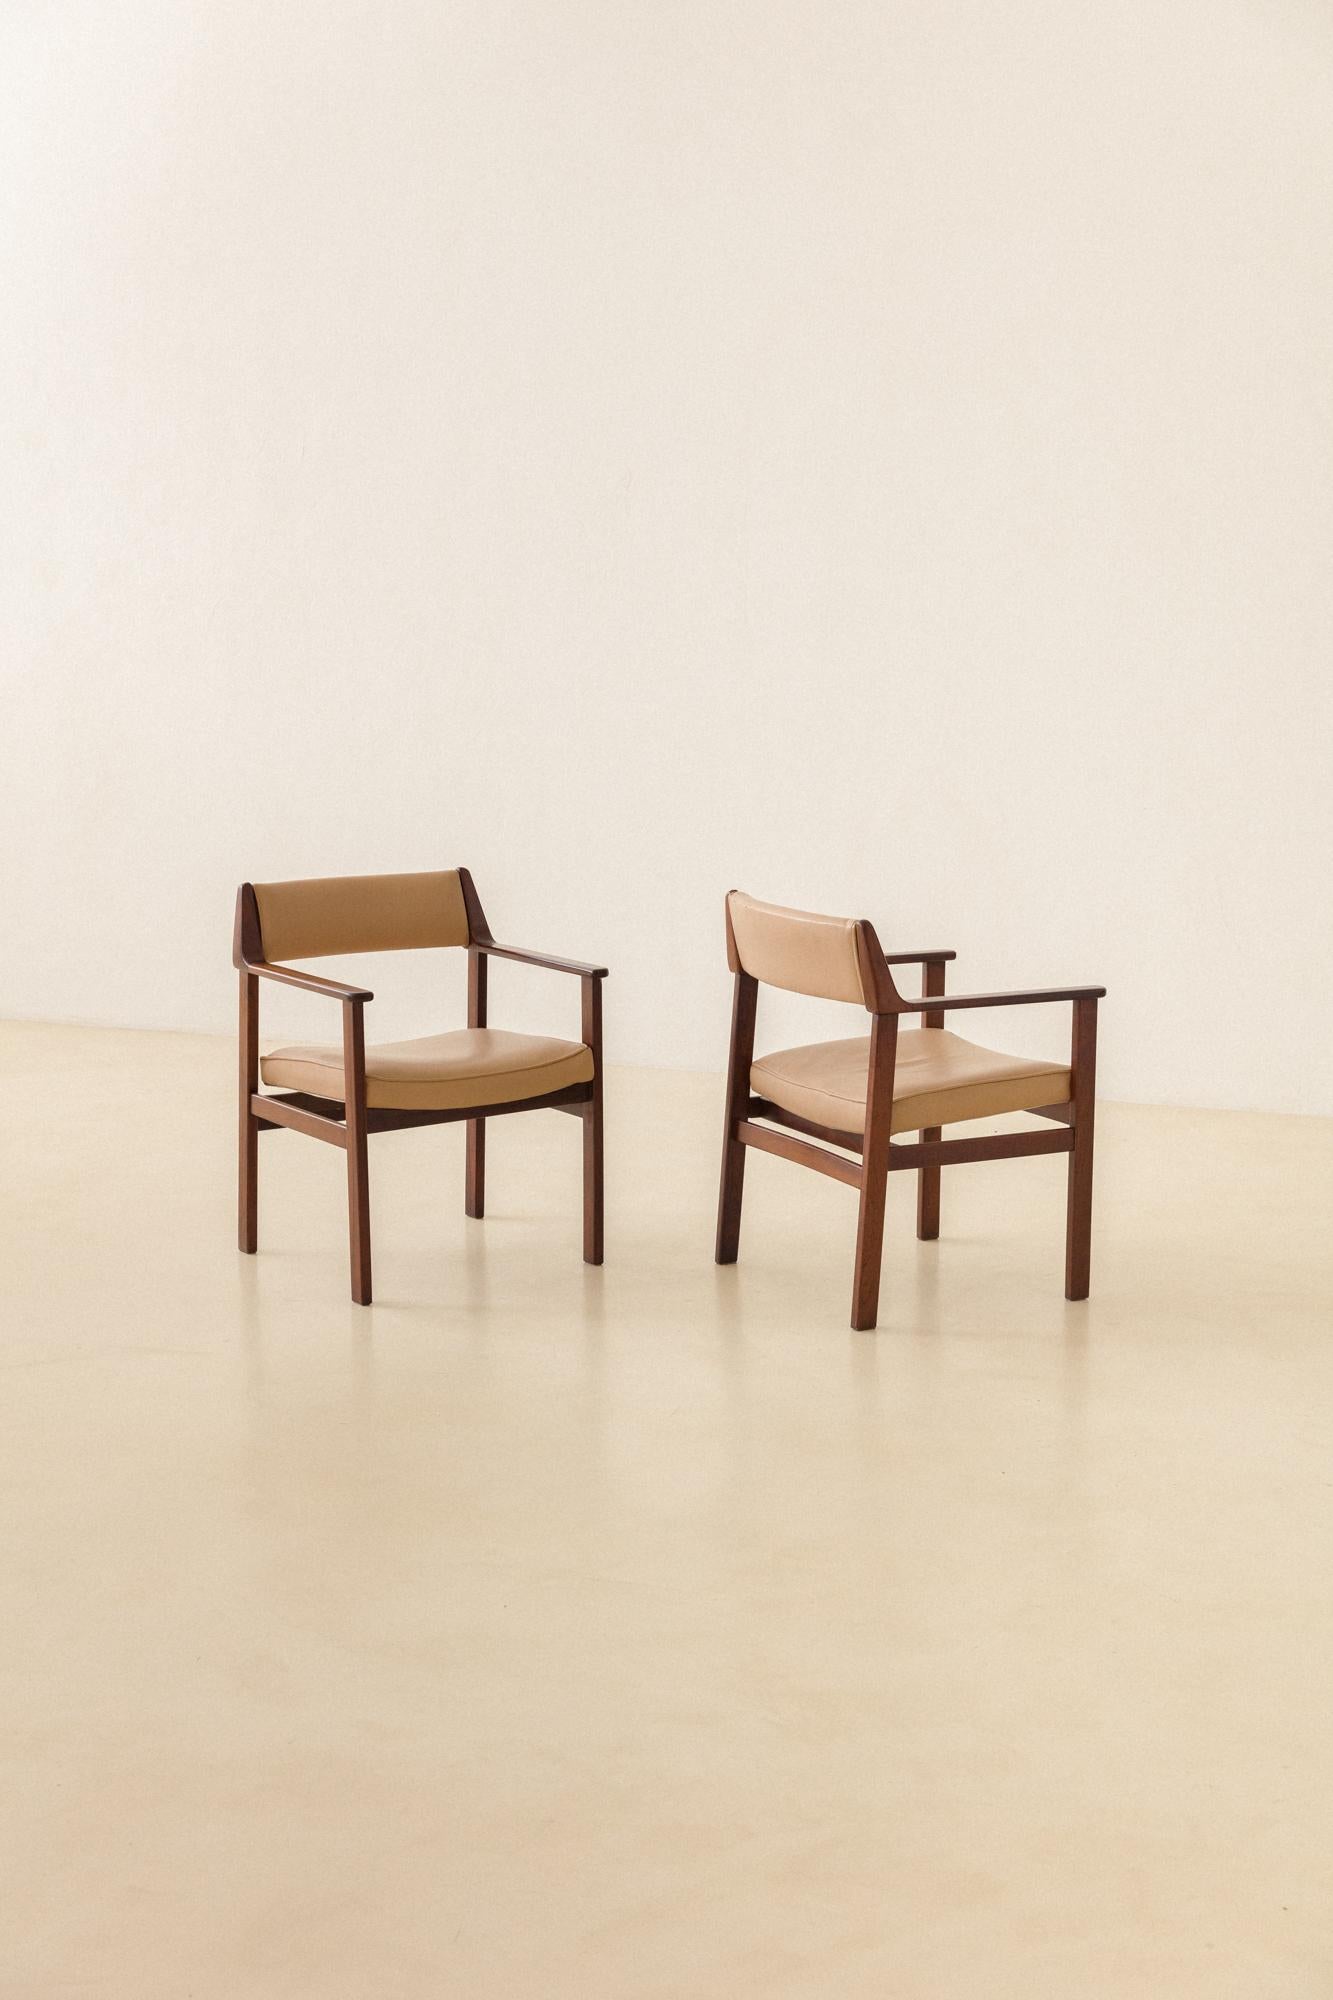 This pair of gorgeous chairs with Armrests are made in solid Rosewood and leather, and was produced by the Brazilian company Casulo in the 1960s. 

Pieces are made of solid Brazilian Rosewood original upholstery in synthetic leather. The chairs